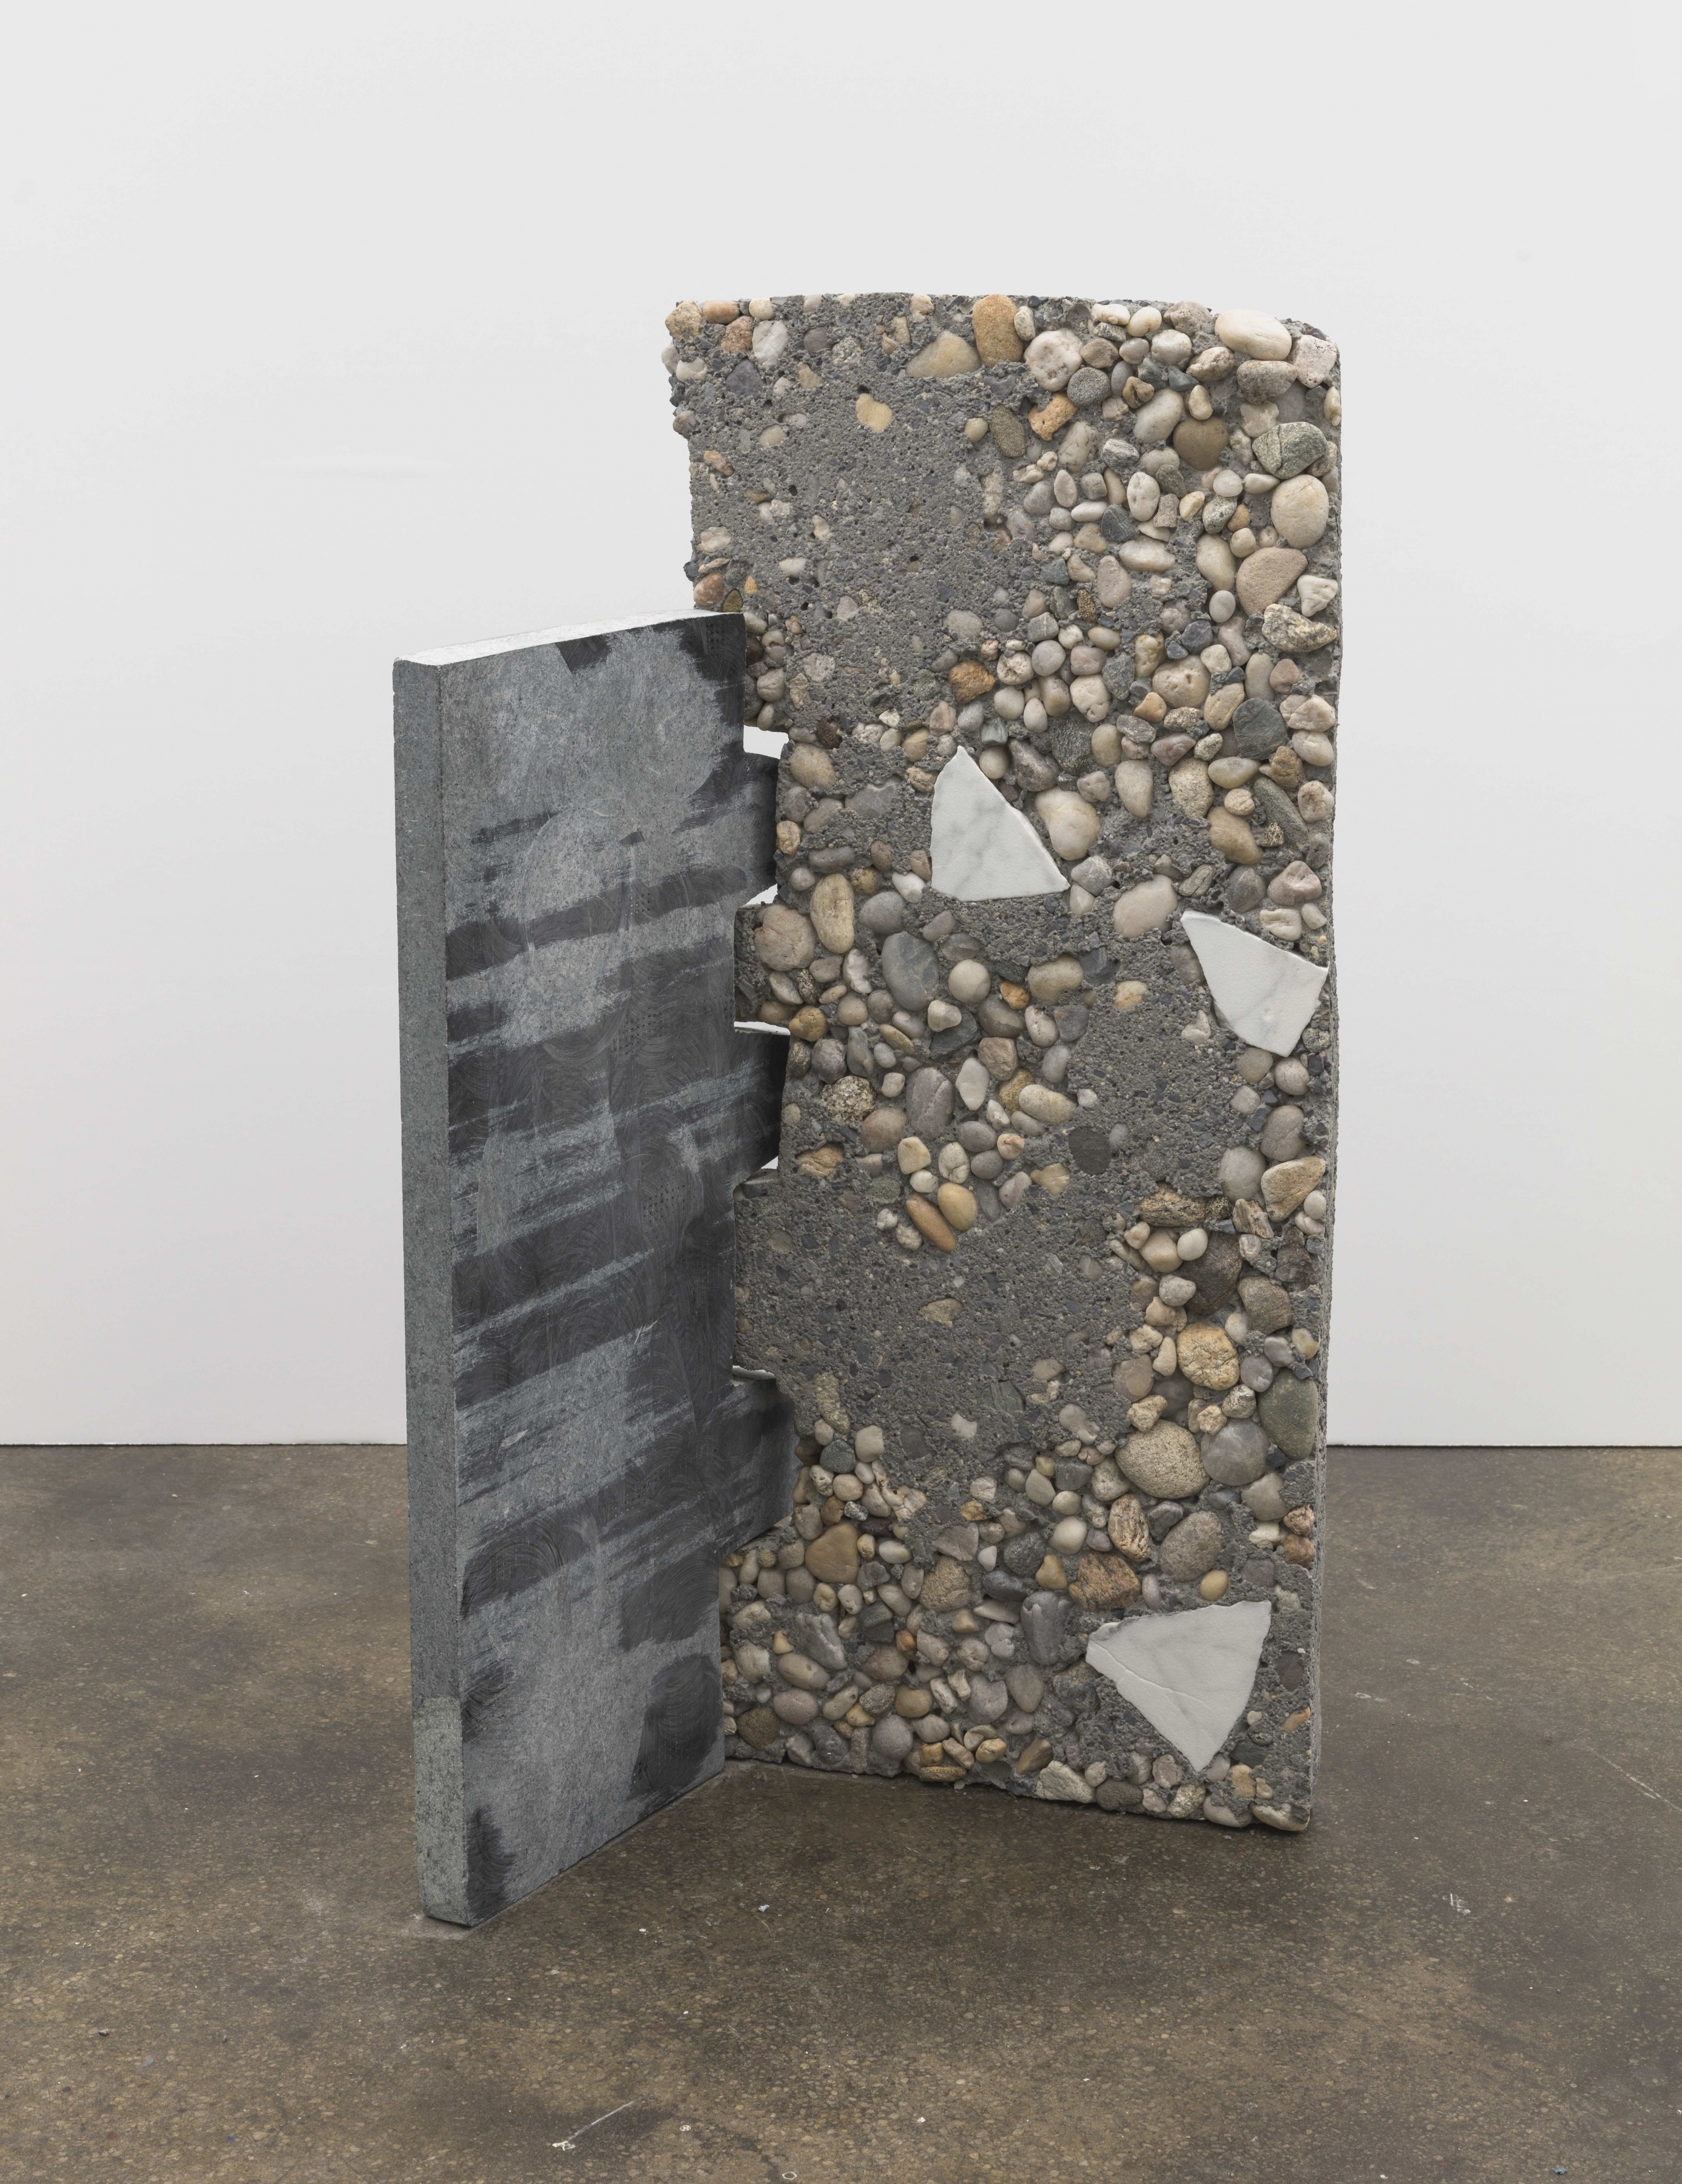 Dependents 2, 2021
soapstone and terrazzo
31 3/4 x 19 1/2 x 14 9/16 inches (80.7 x 49.5 x 37 cm) SM-S.21.1436
&nbsp;